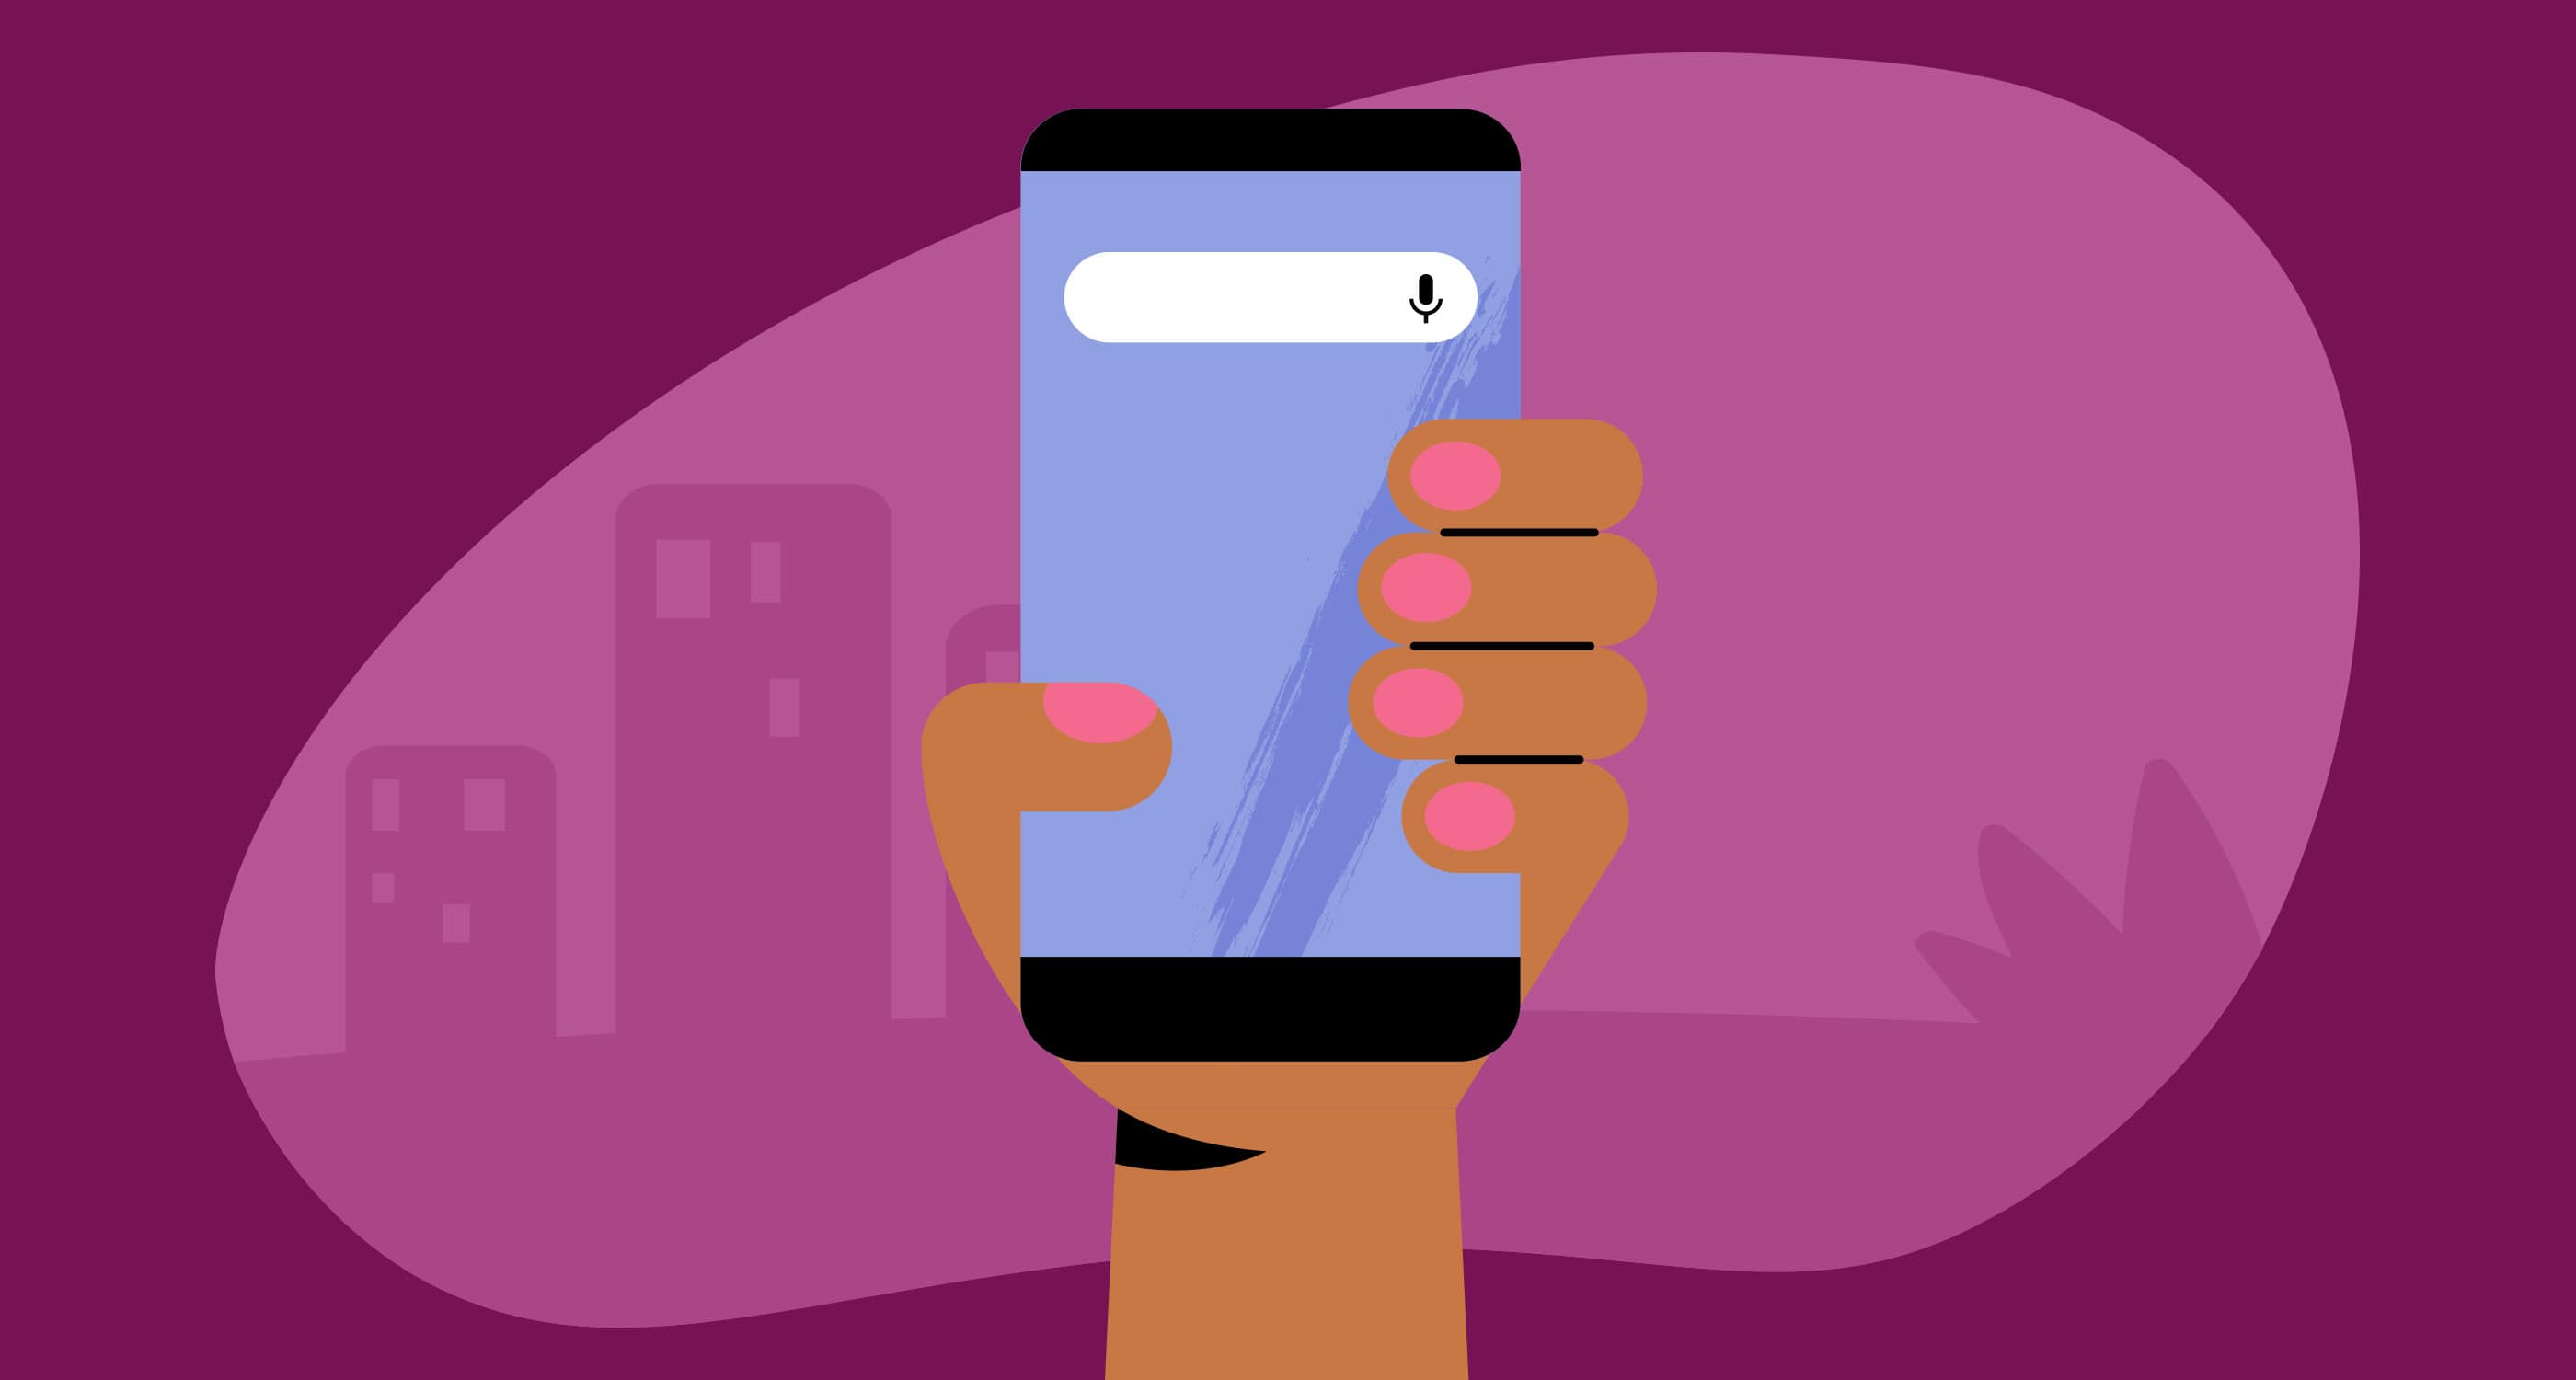 An illustration of a phone with an empty search bar being held by a hand with brown skin and pink nails. The background is dark purple with a lighter purple abstract shape that shows shadows of city buildings.